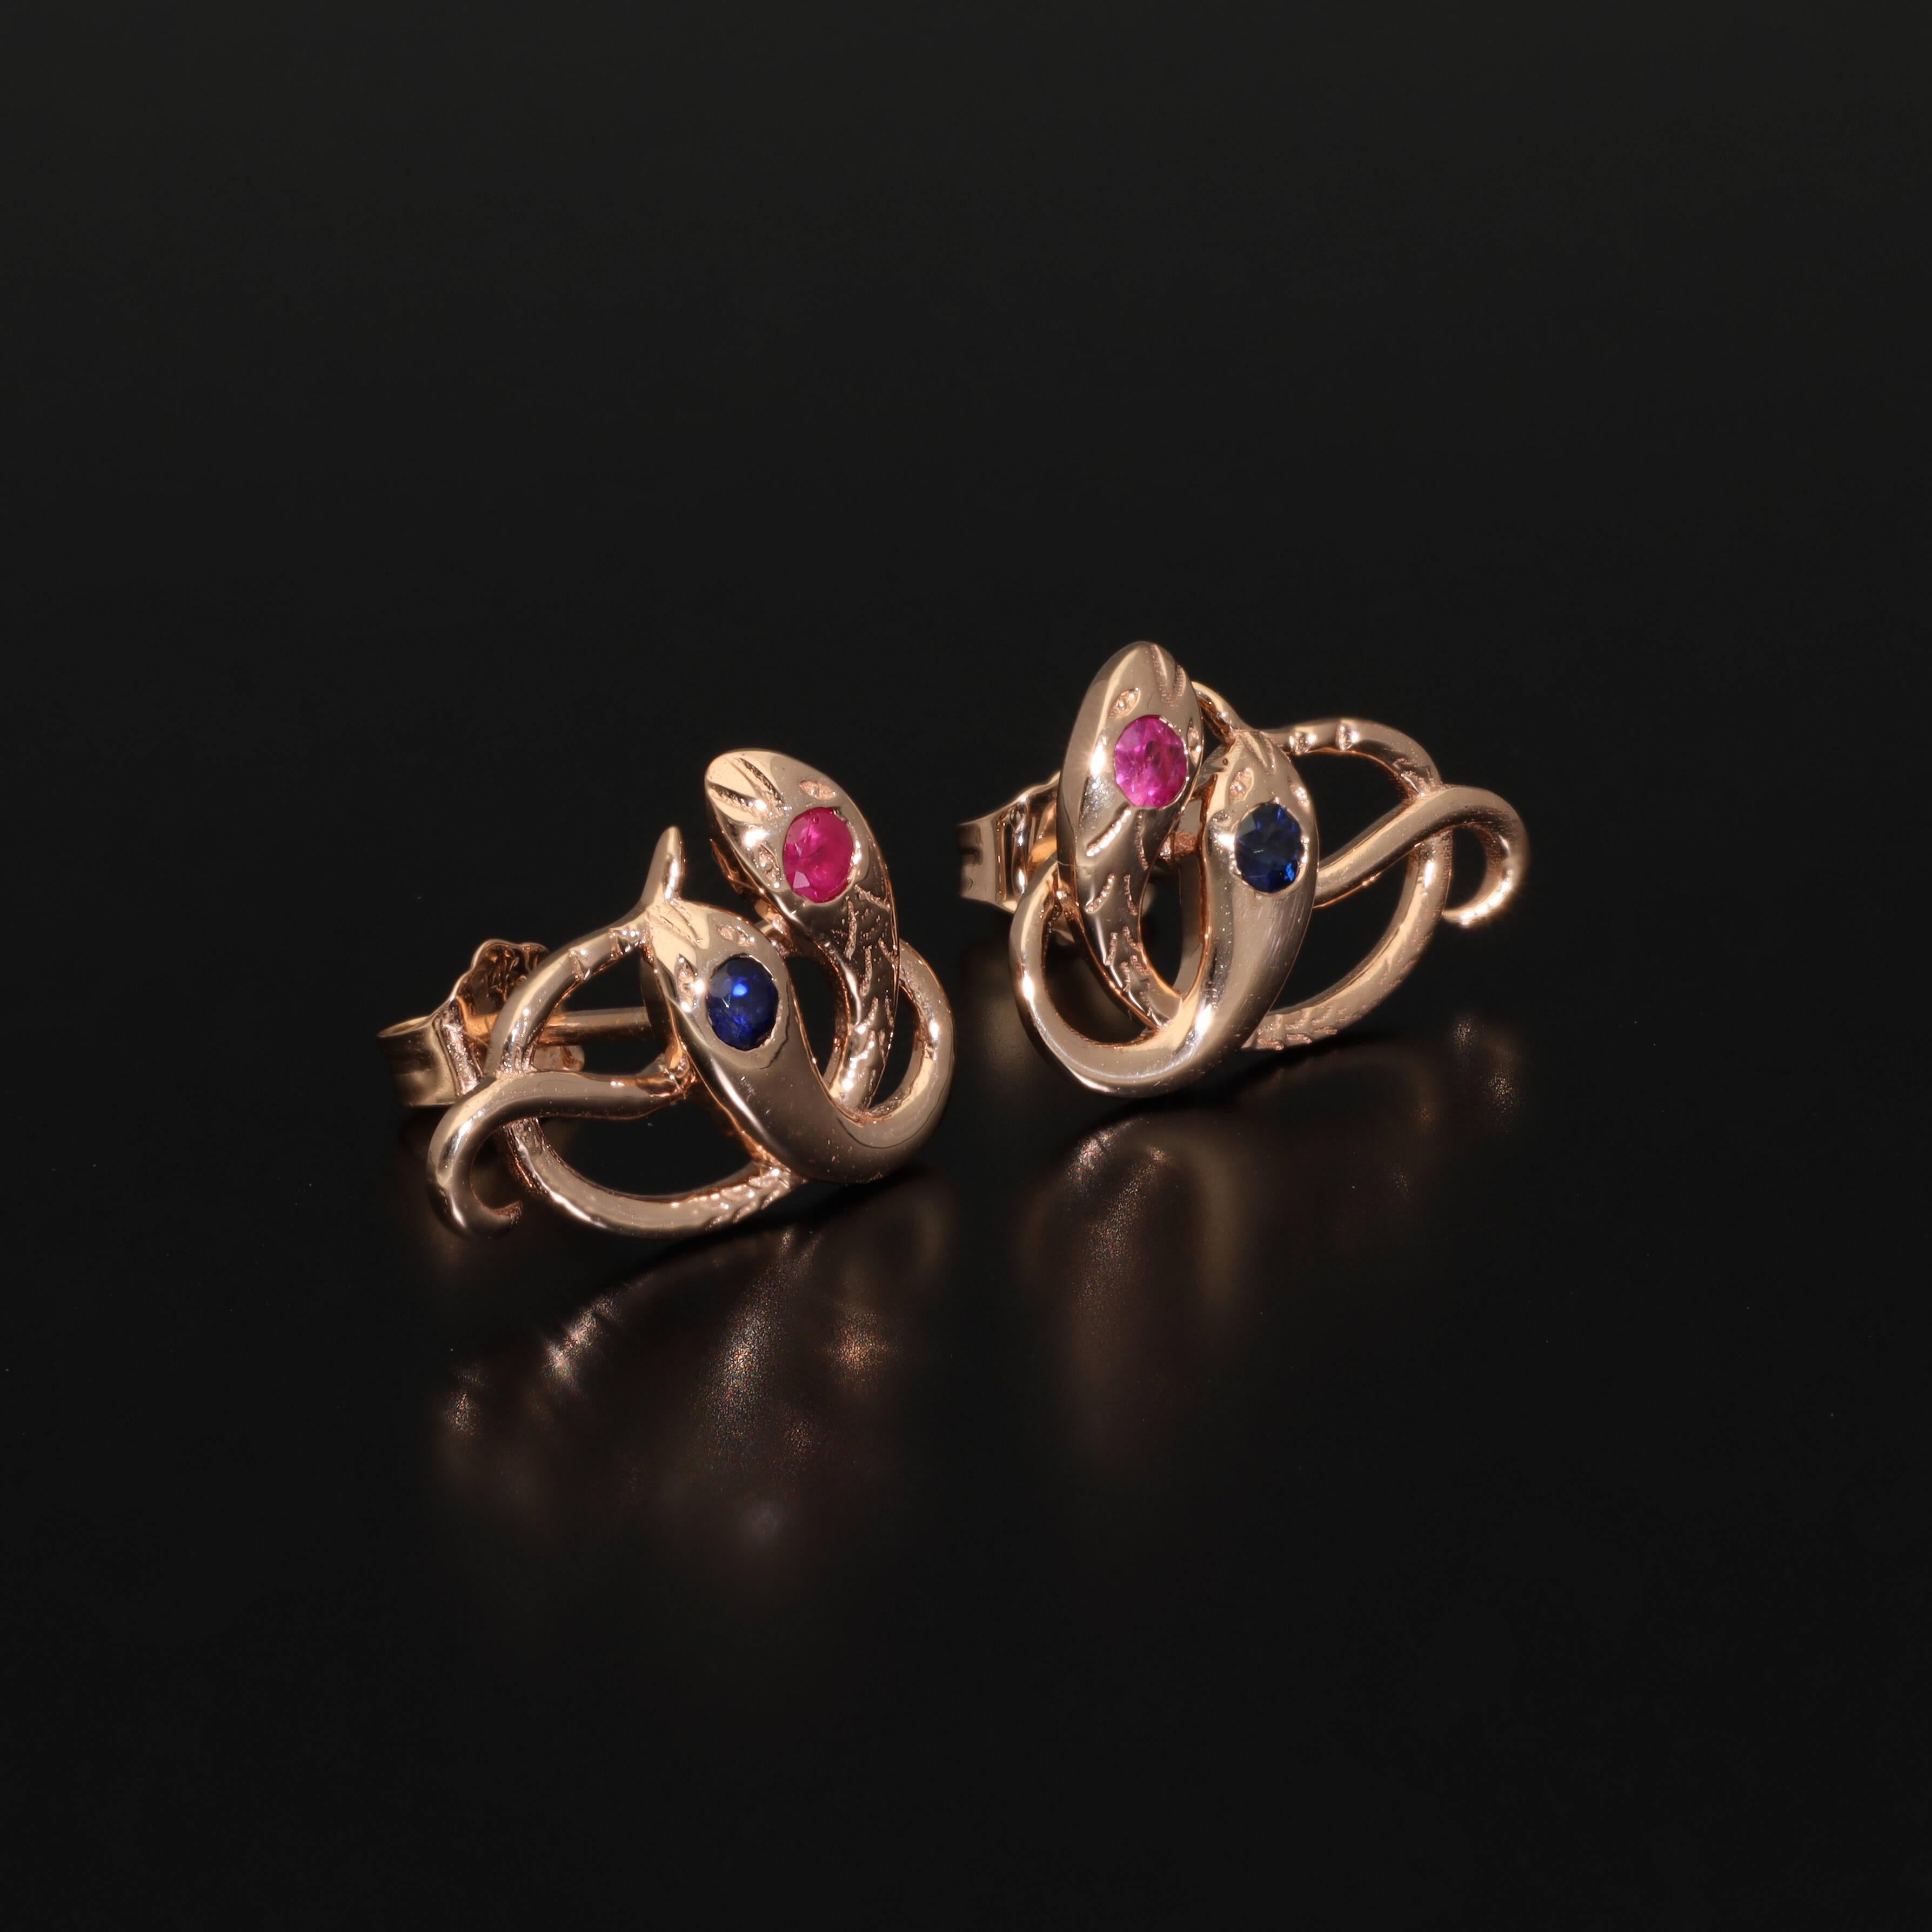 Victorian Revival Gold Snake Stud Earrings Ruby Sapphire Rose Gold Serpent Studs For Sale 2